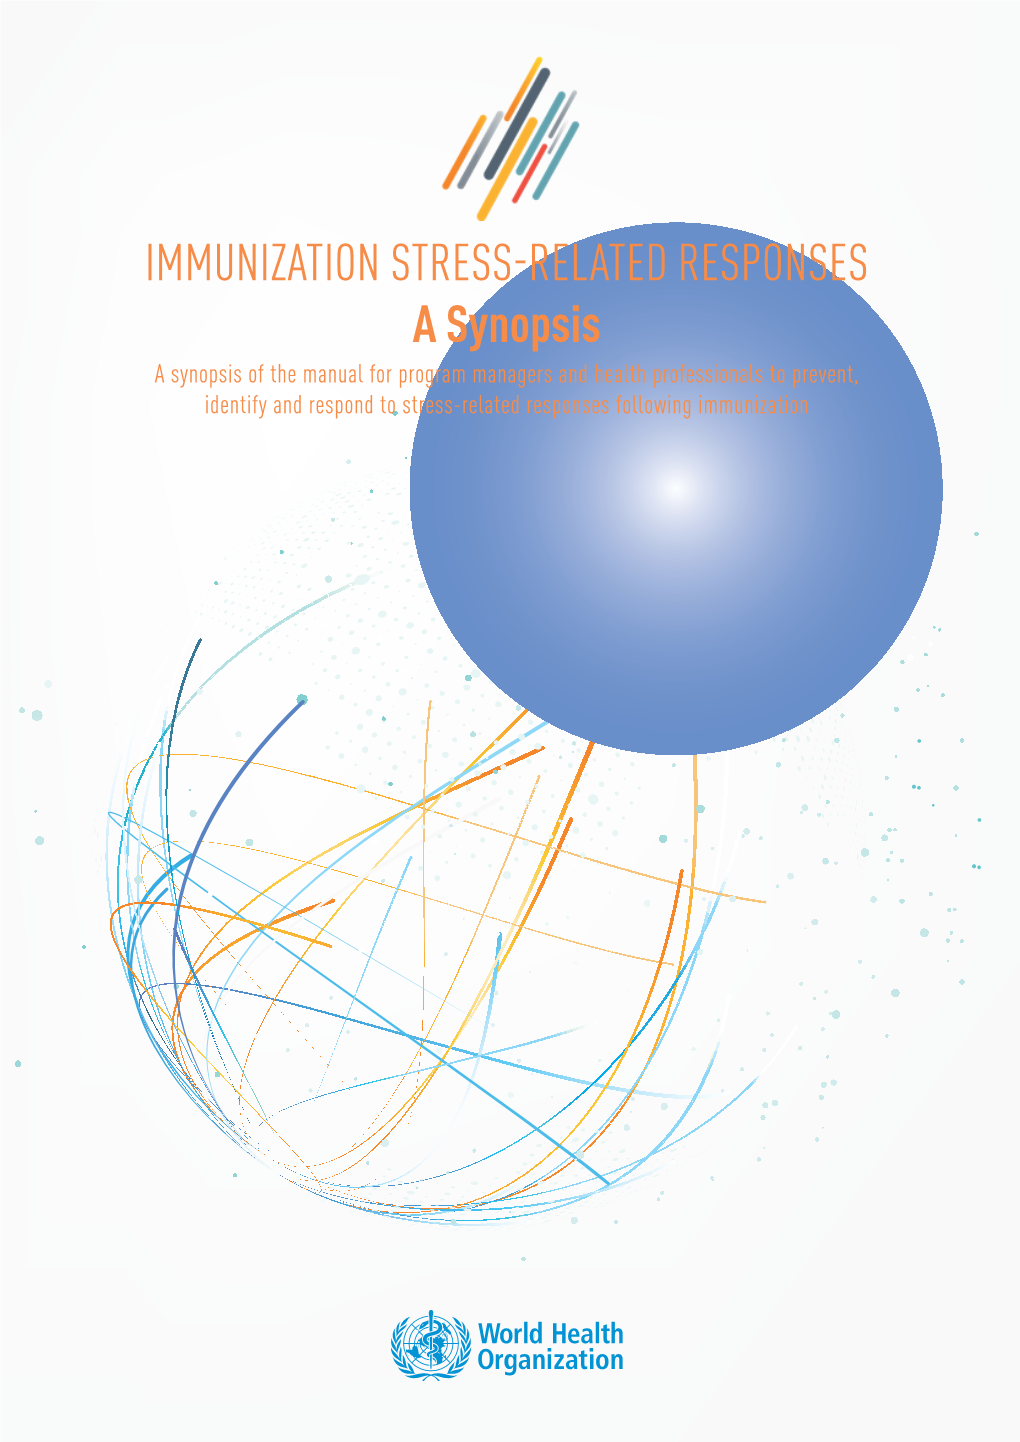 IMMUNIZATION STRESS-RELATED RESPONSES a Synopsis